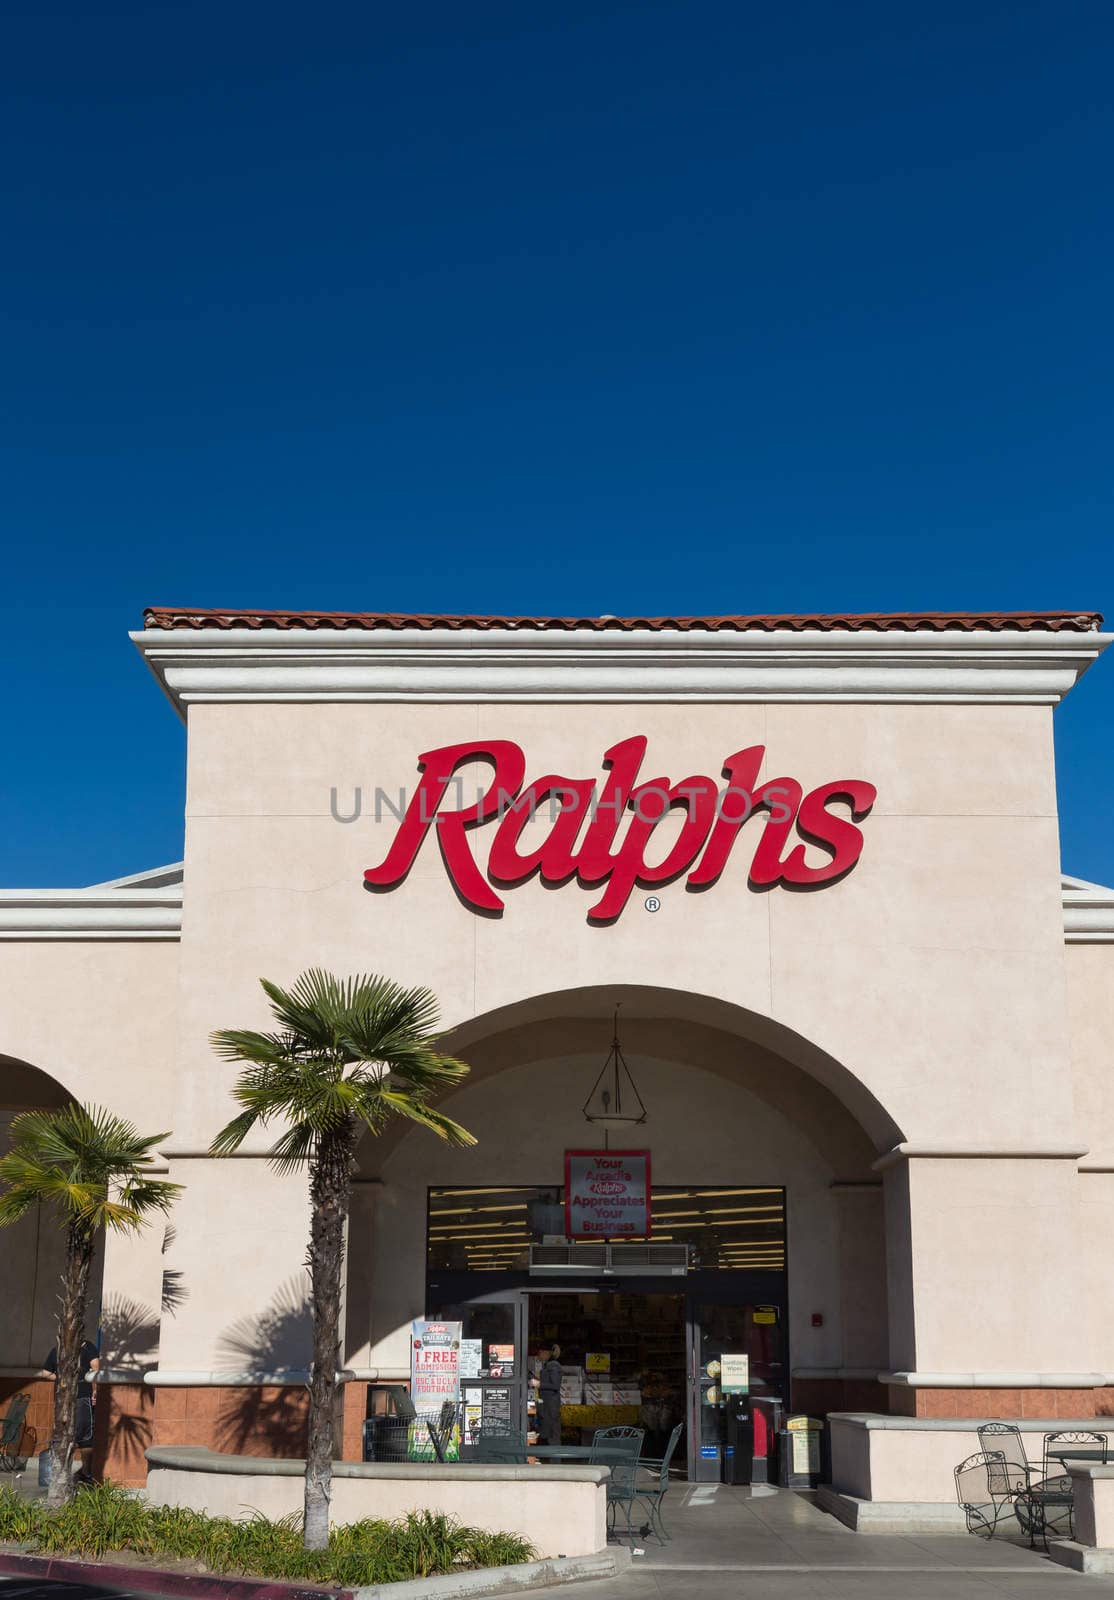 PASADENA, CA/USA - NOVEMBER 22, 2015: Ralphs grocery store sign. Ralphs is a major supermarket chain in the Southern California area and the largest subsidiary of Cincinnati-based Kroger.